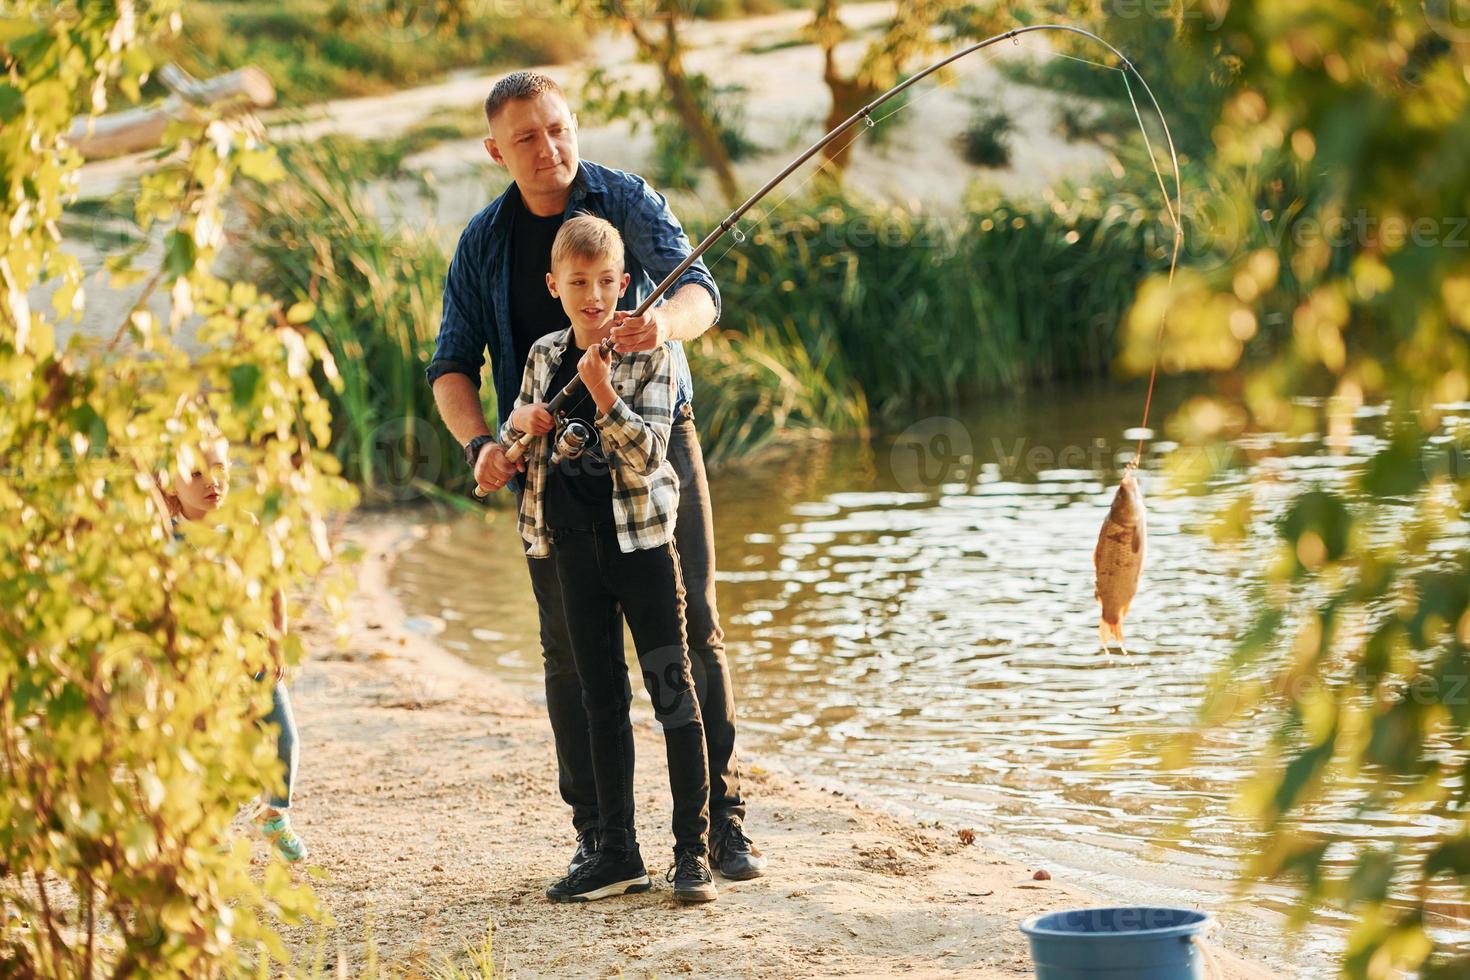 Holding the catch. Father and son on fishing together outdoors at summertime photo